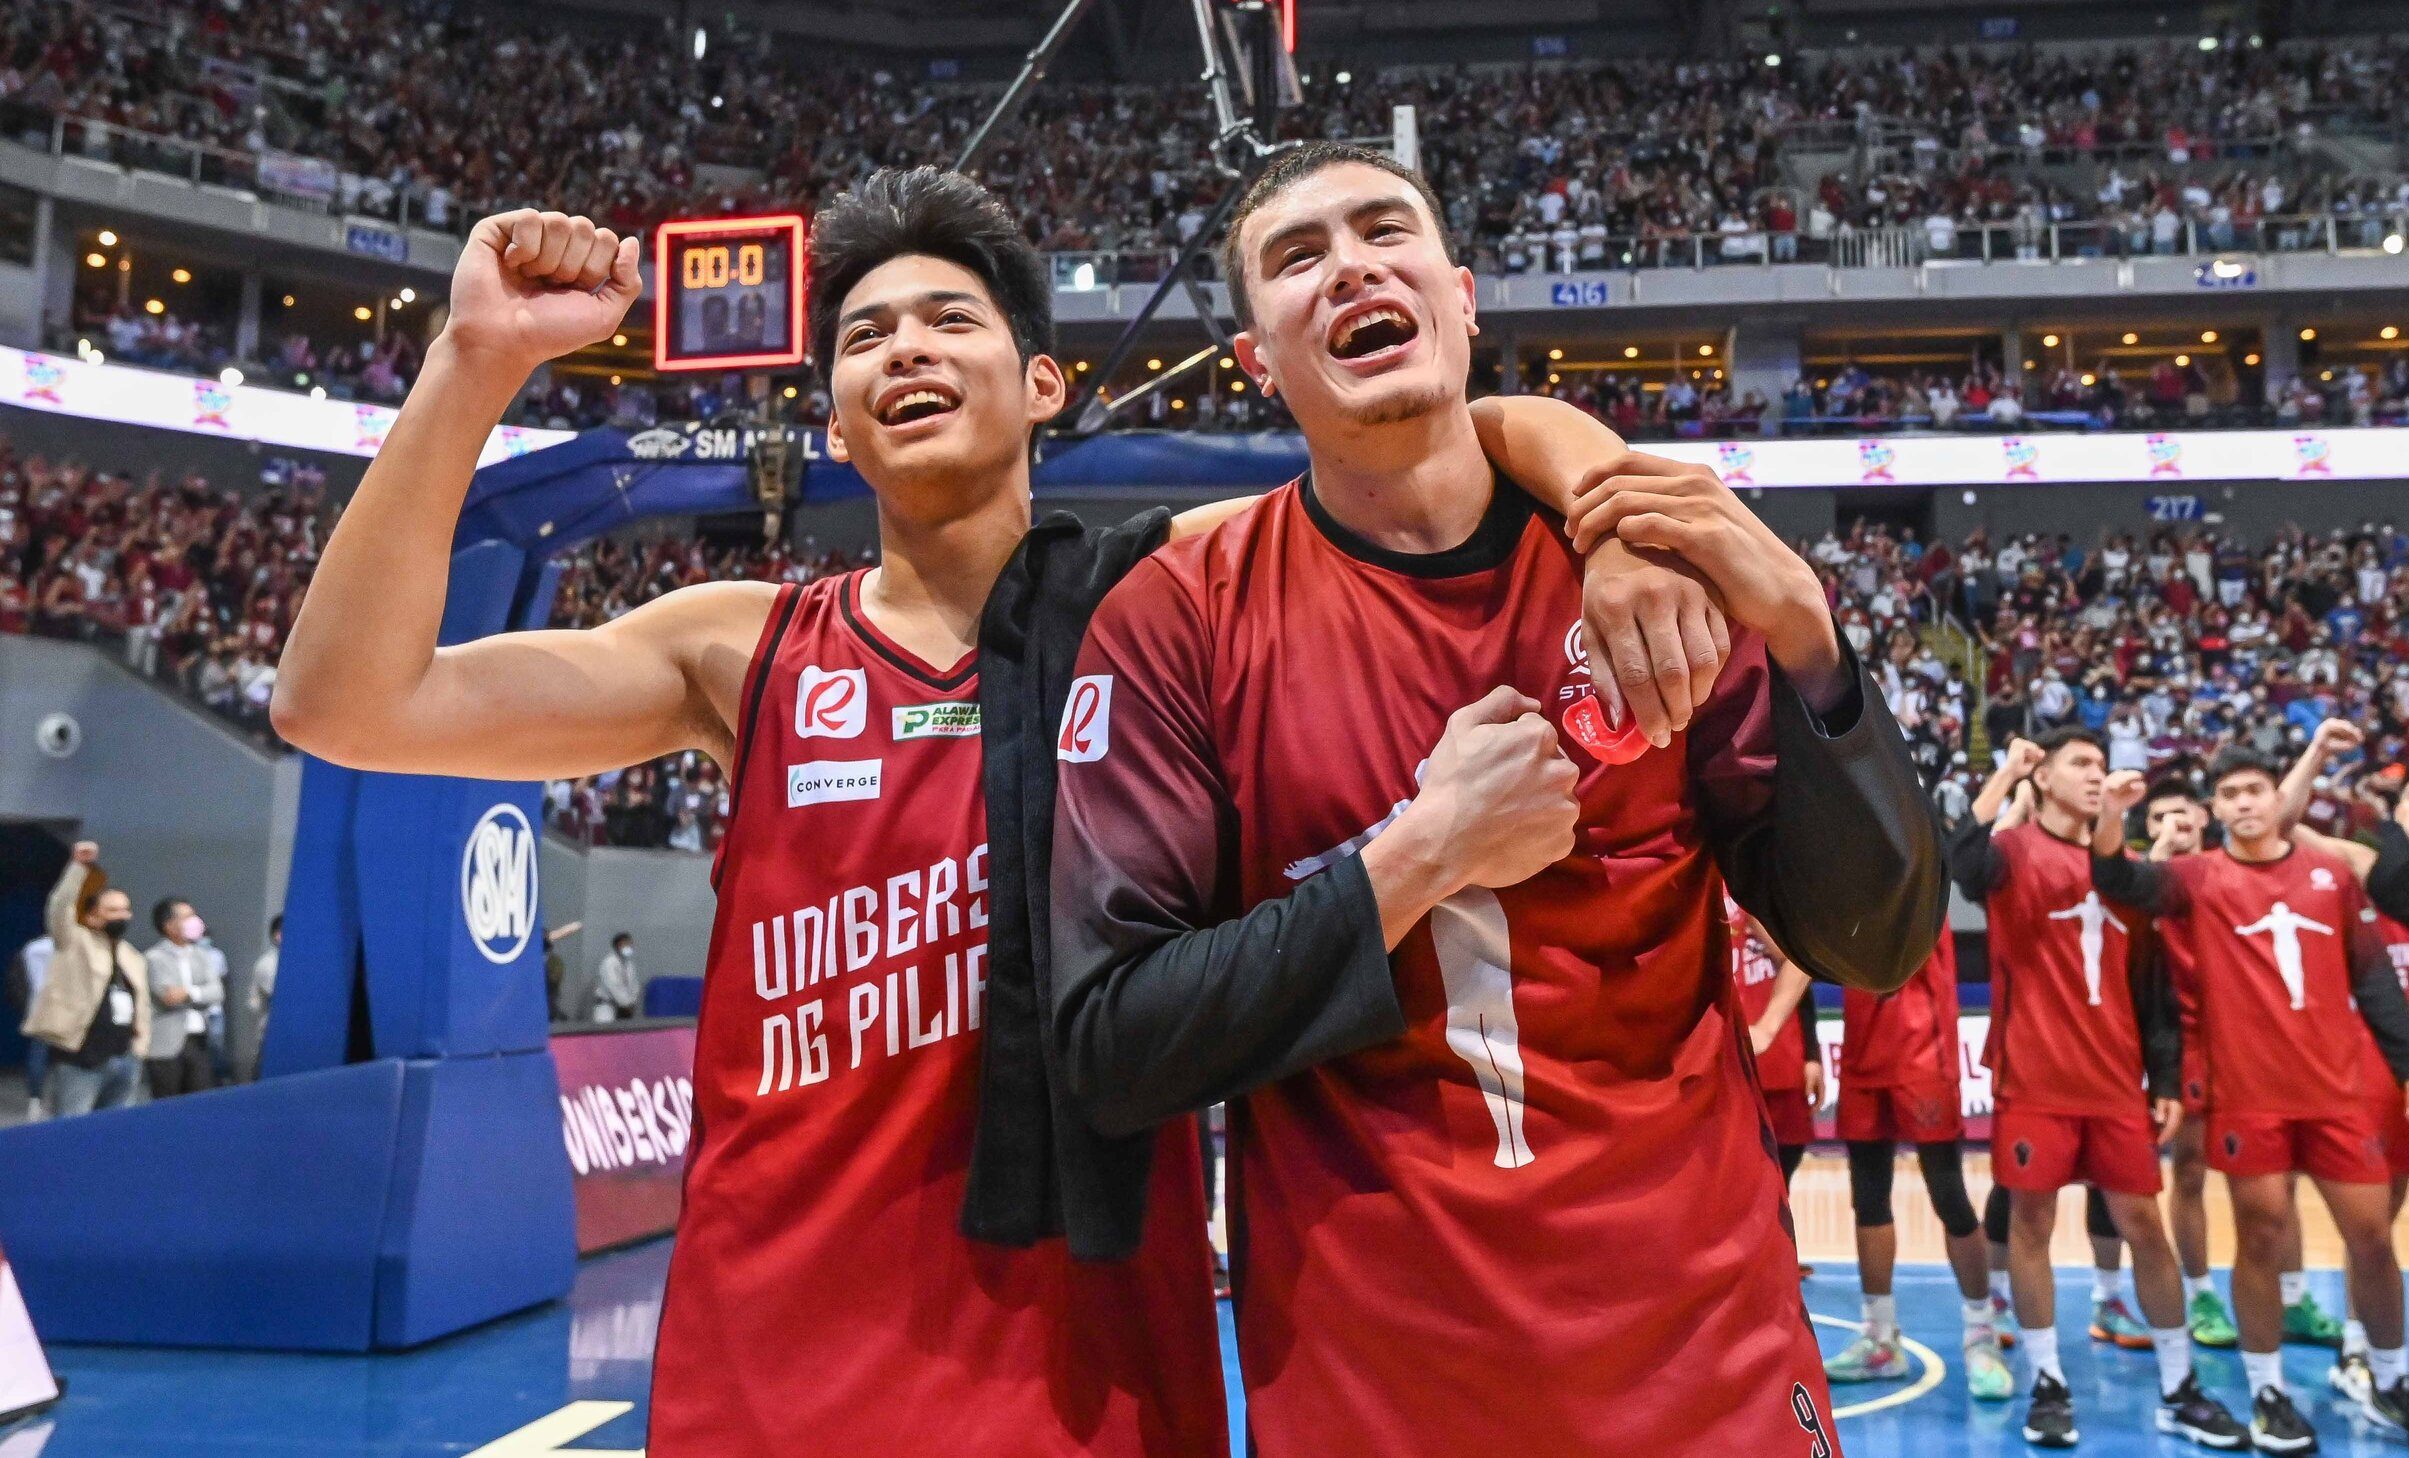 Inside tales from the UP Maroons’ road to ‘destiny’